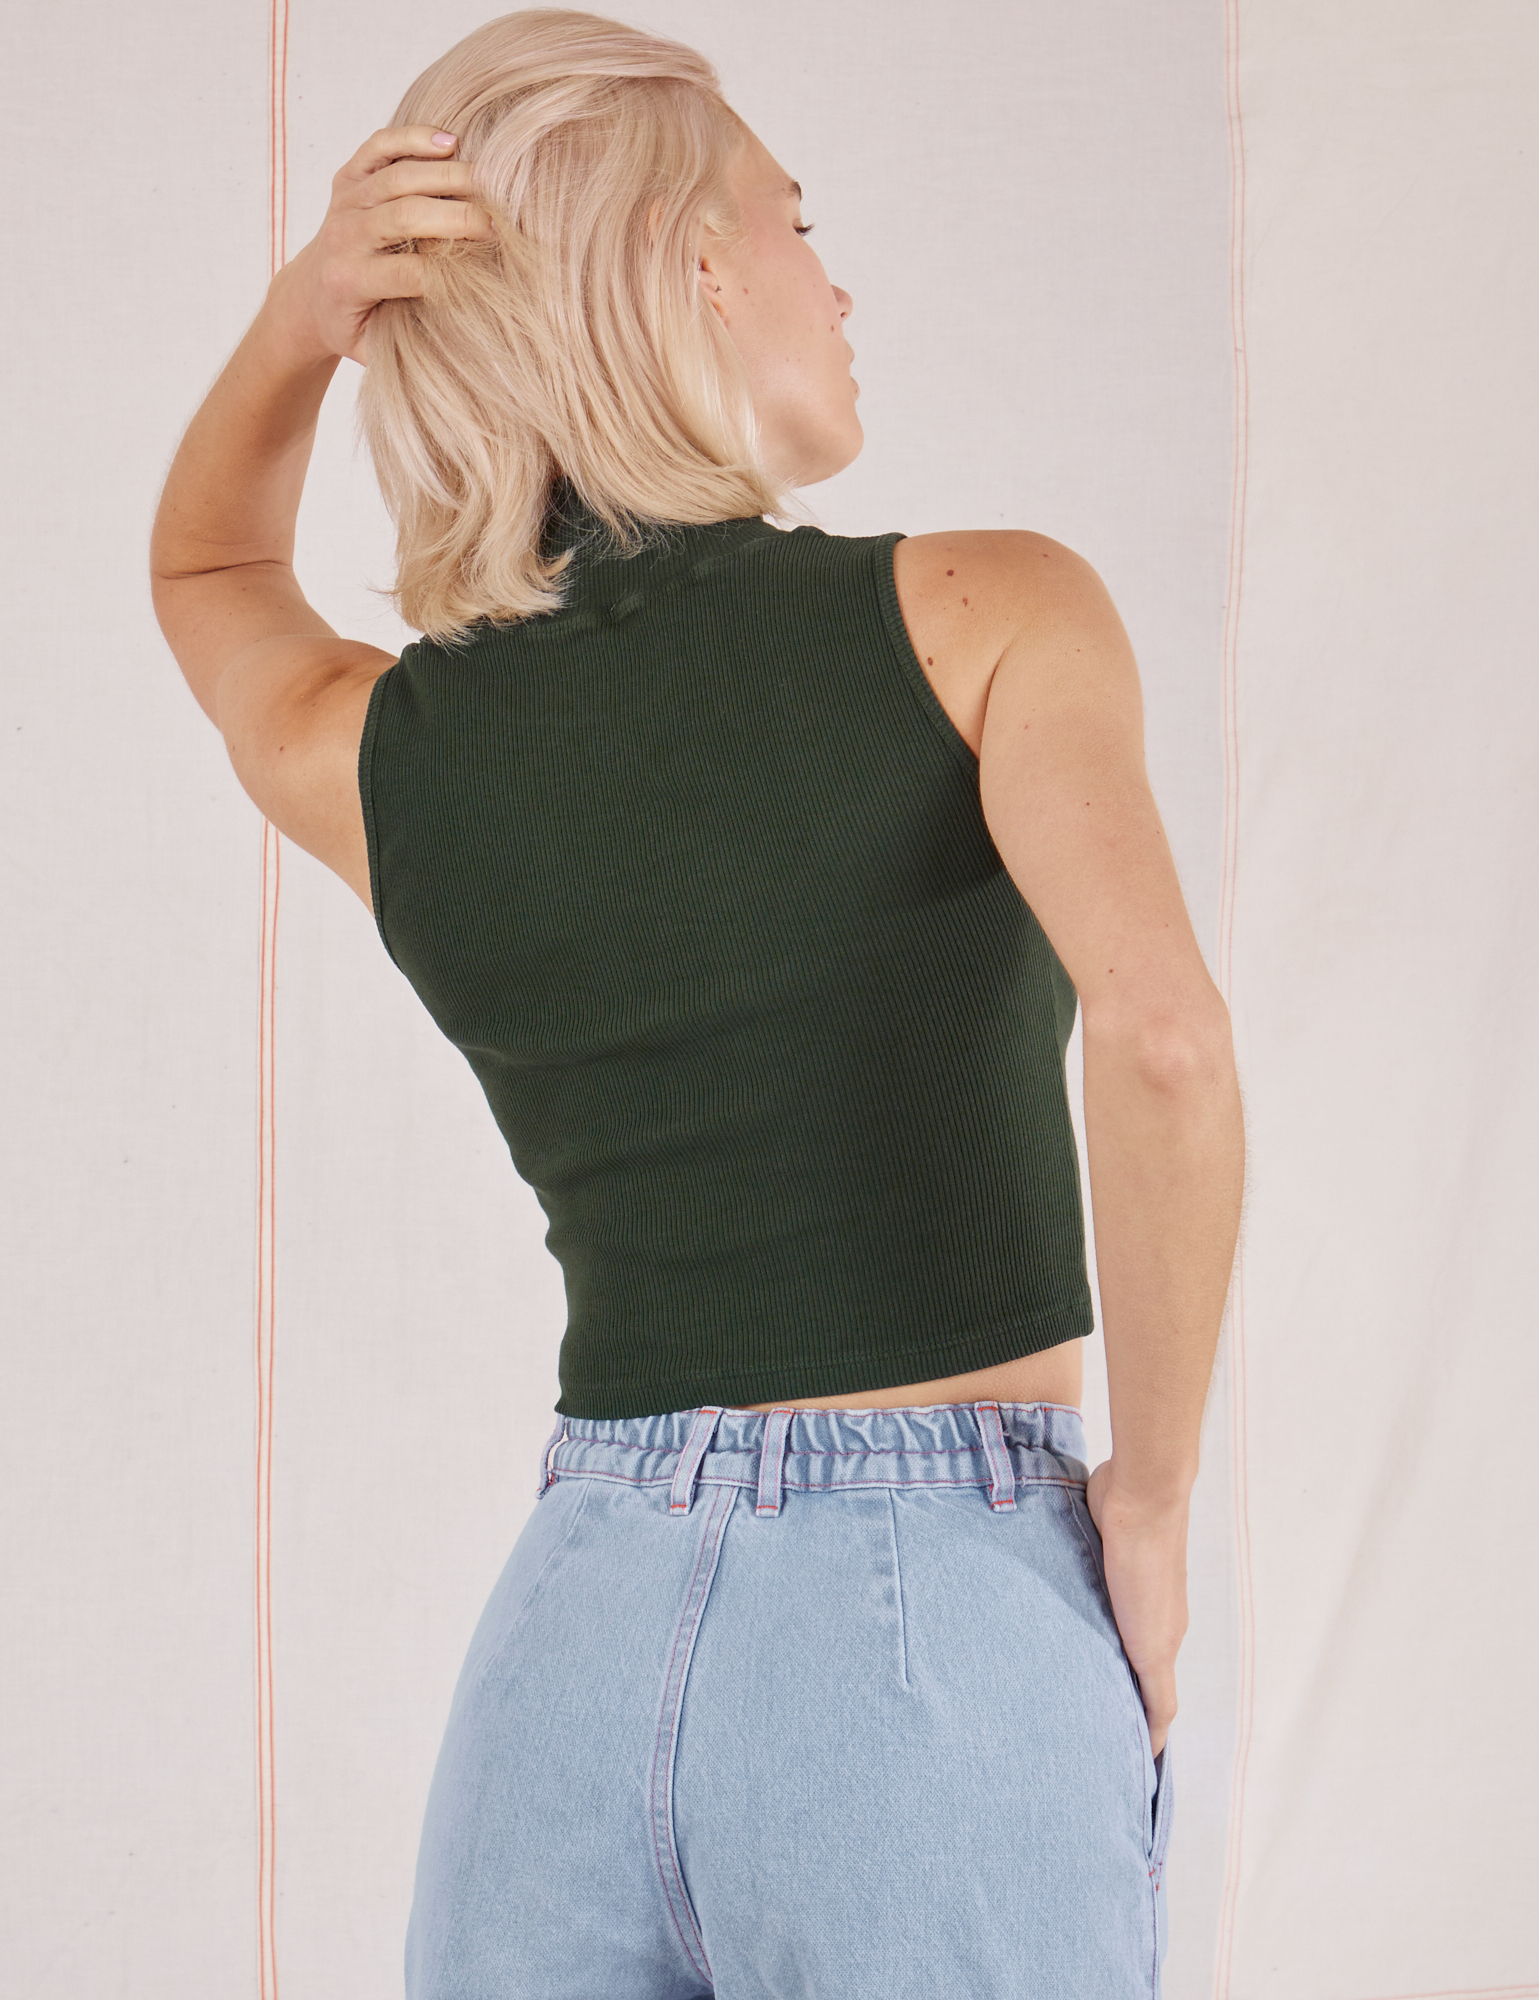 Sleeveless Essential Turtleneck in Swamp Green back view on Madeline